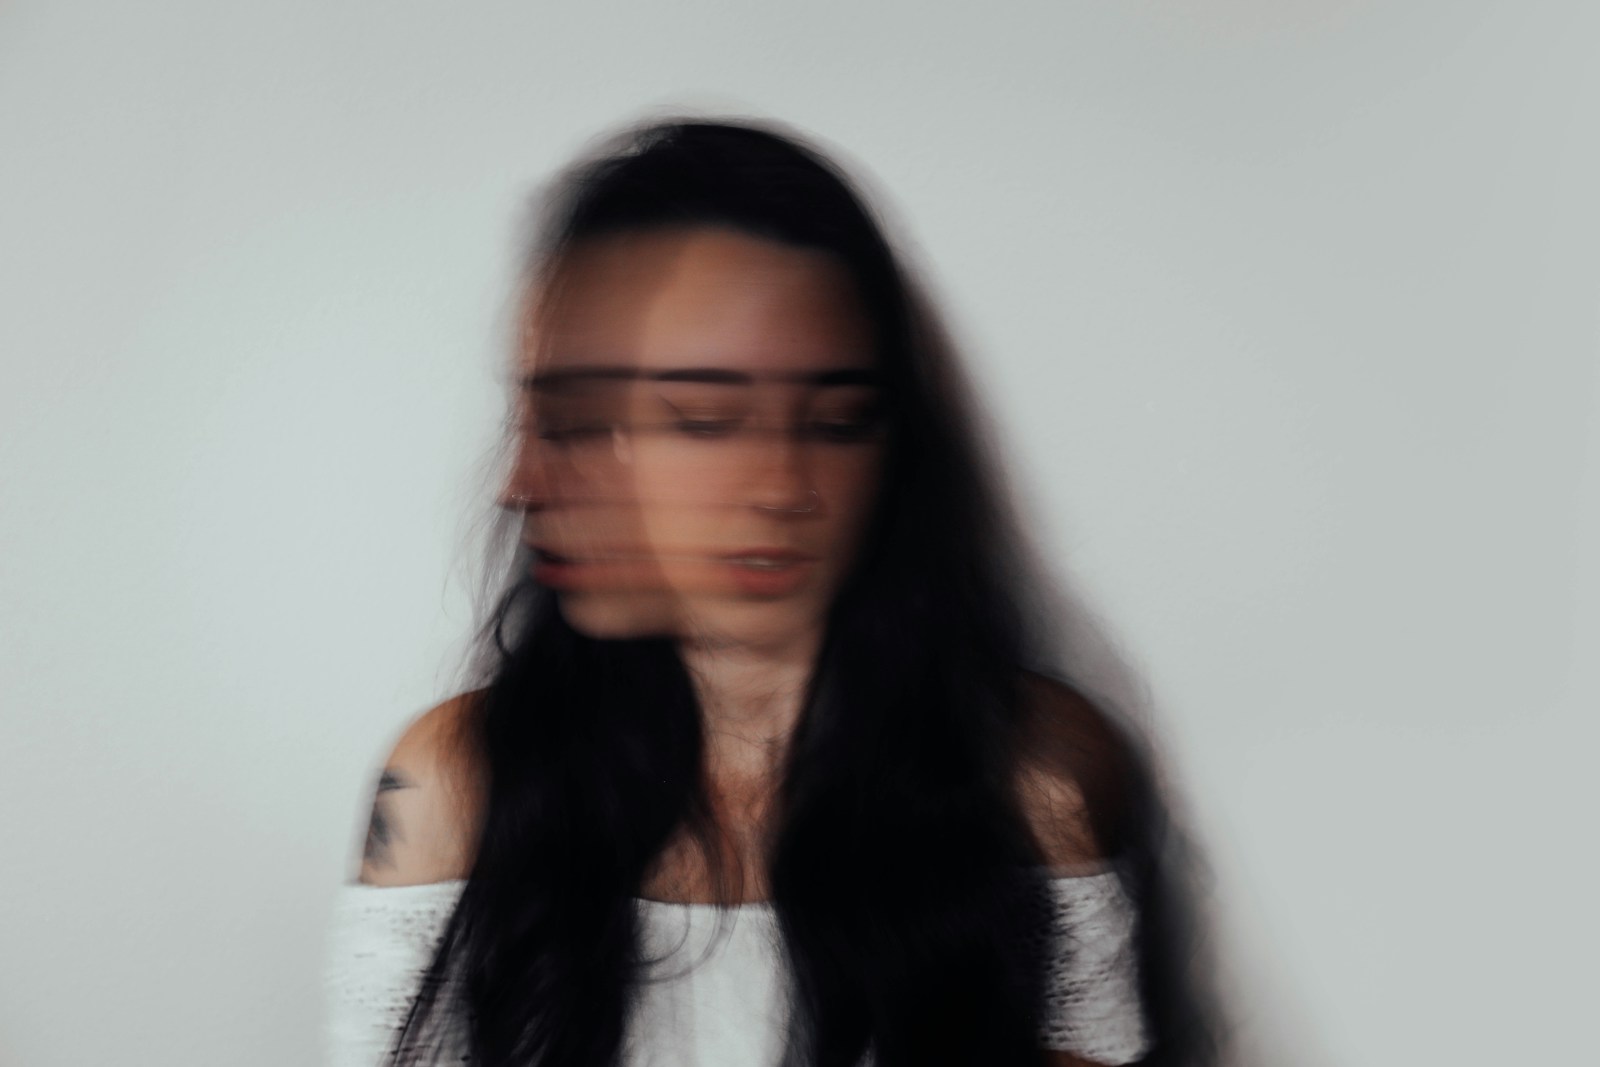 a blurry photo of a woman with glasses, anxiety recovery stages